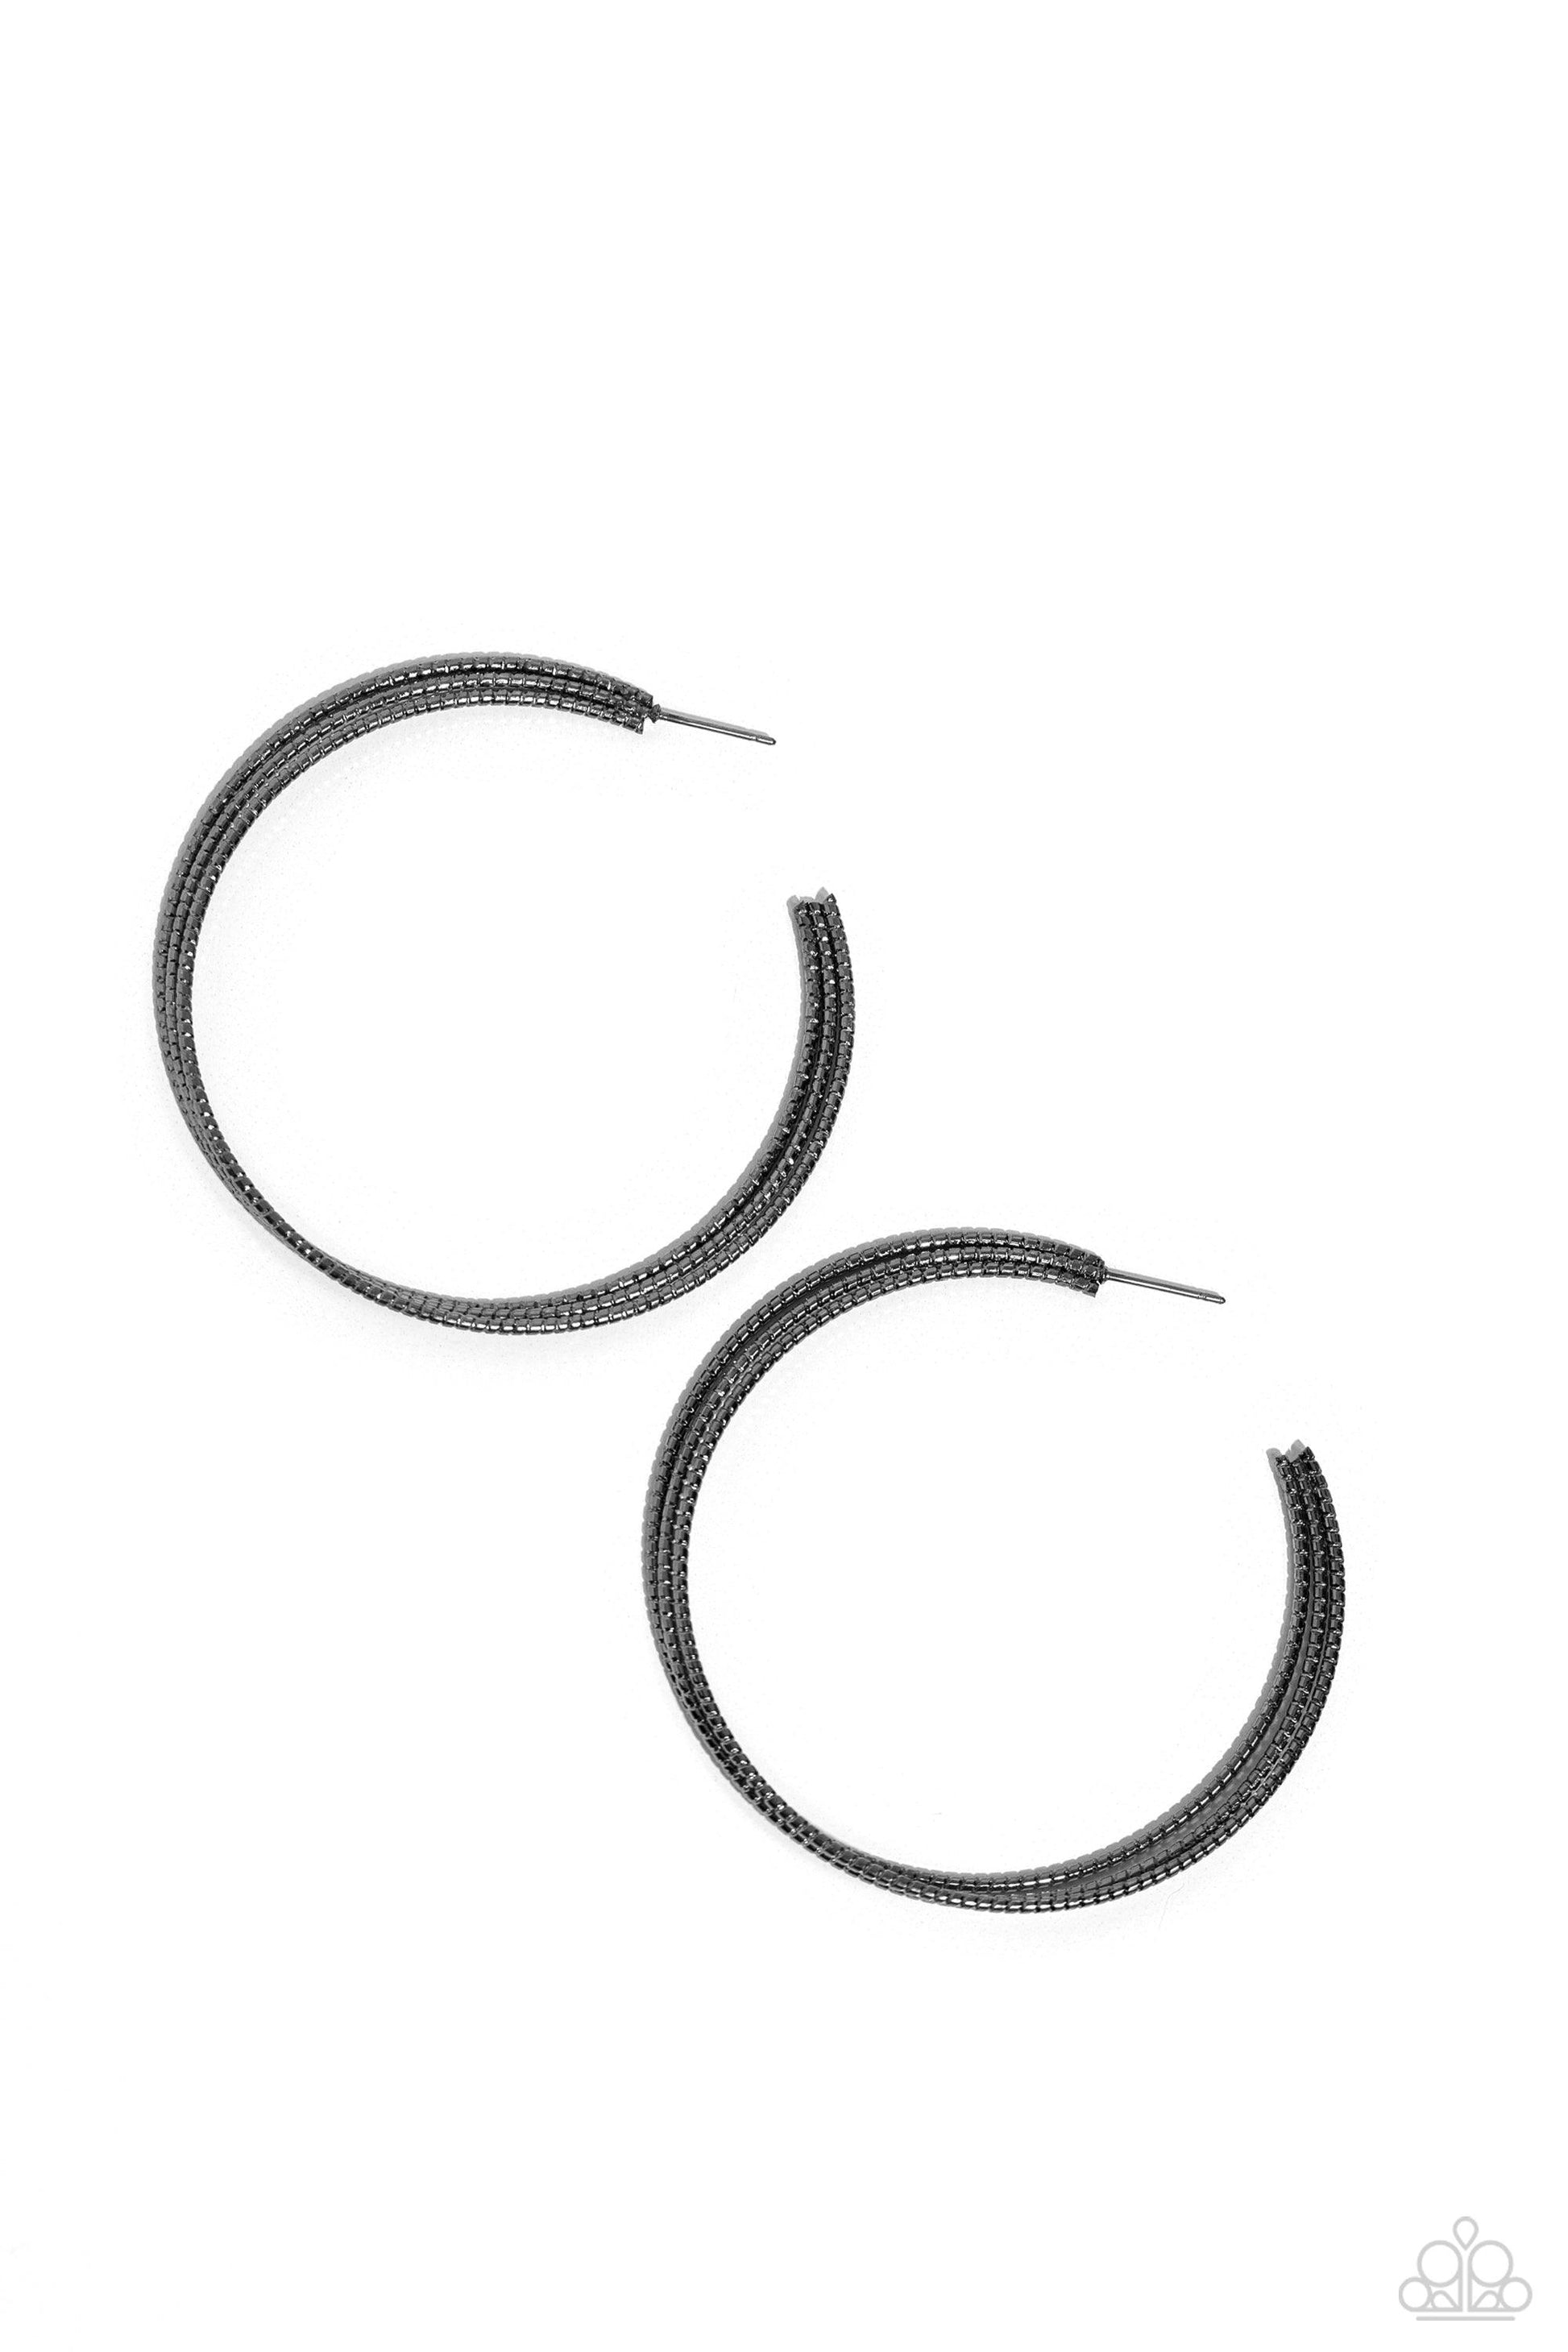 Paparazzi Accessories - Candescent Curves - Black Hoop Earrings - Bling by JessieK